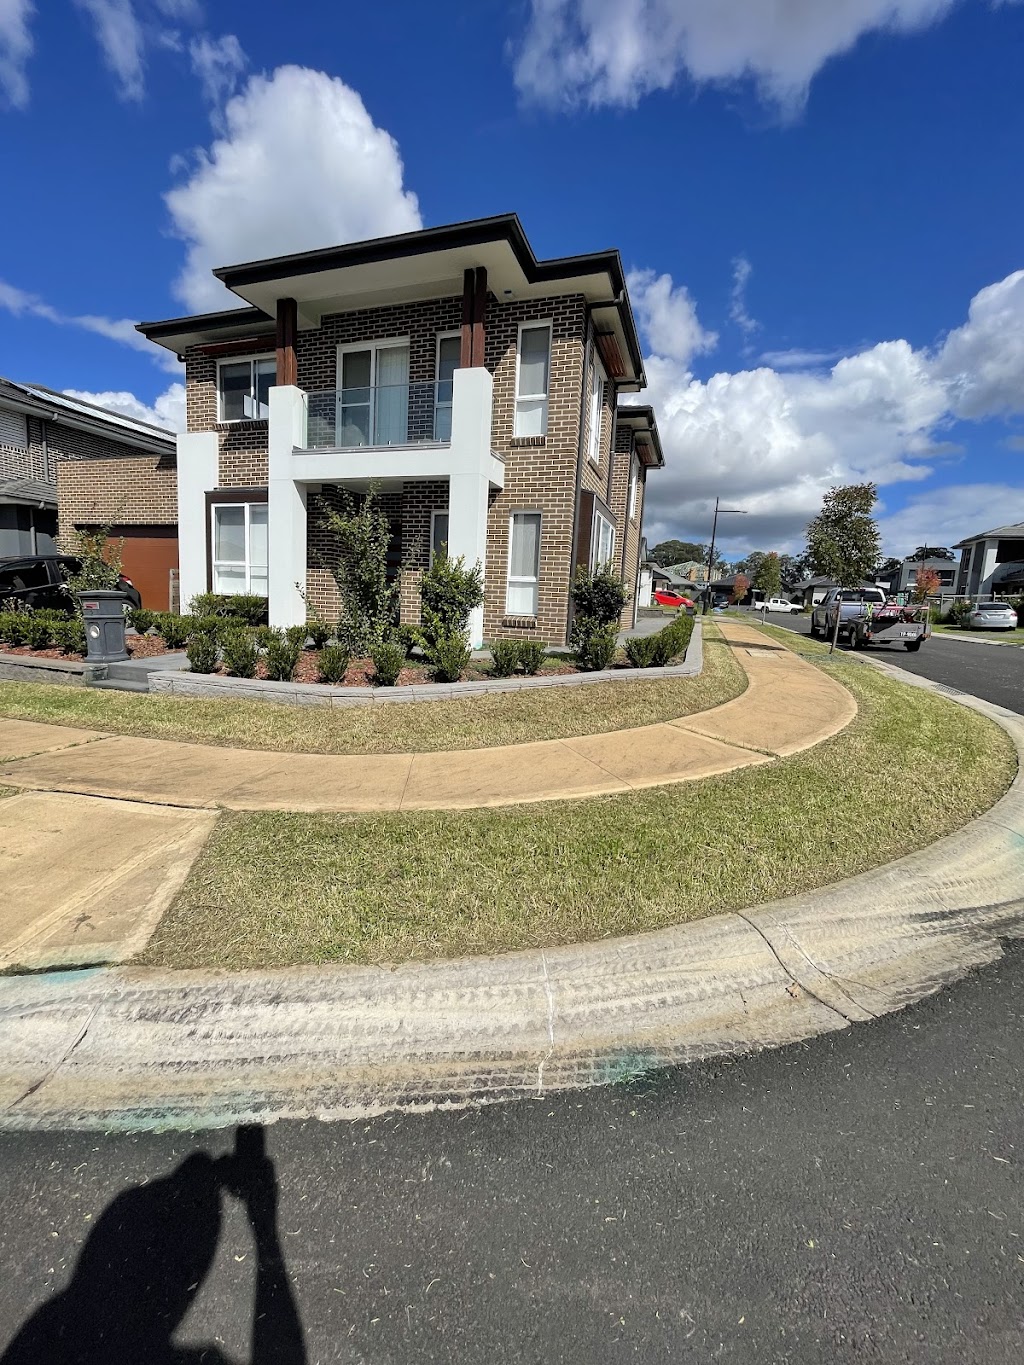 Oran park lawn and gardening services | general contractor | 27A Lawler Dr, Oran Park NSW 2570, Australia | 0414516070 OR +61 414 516 070